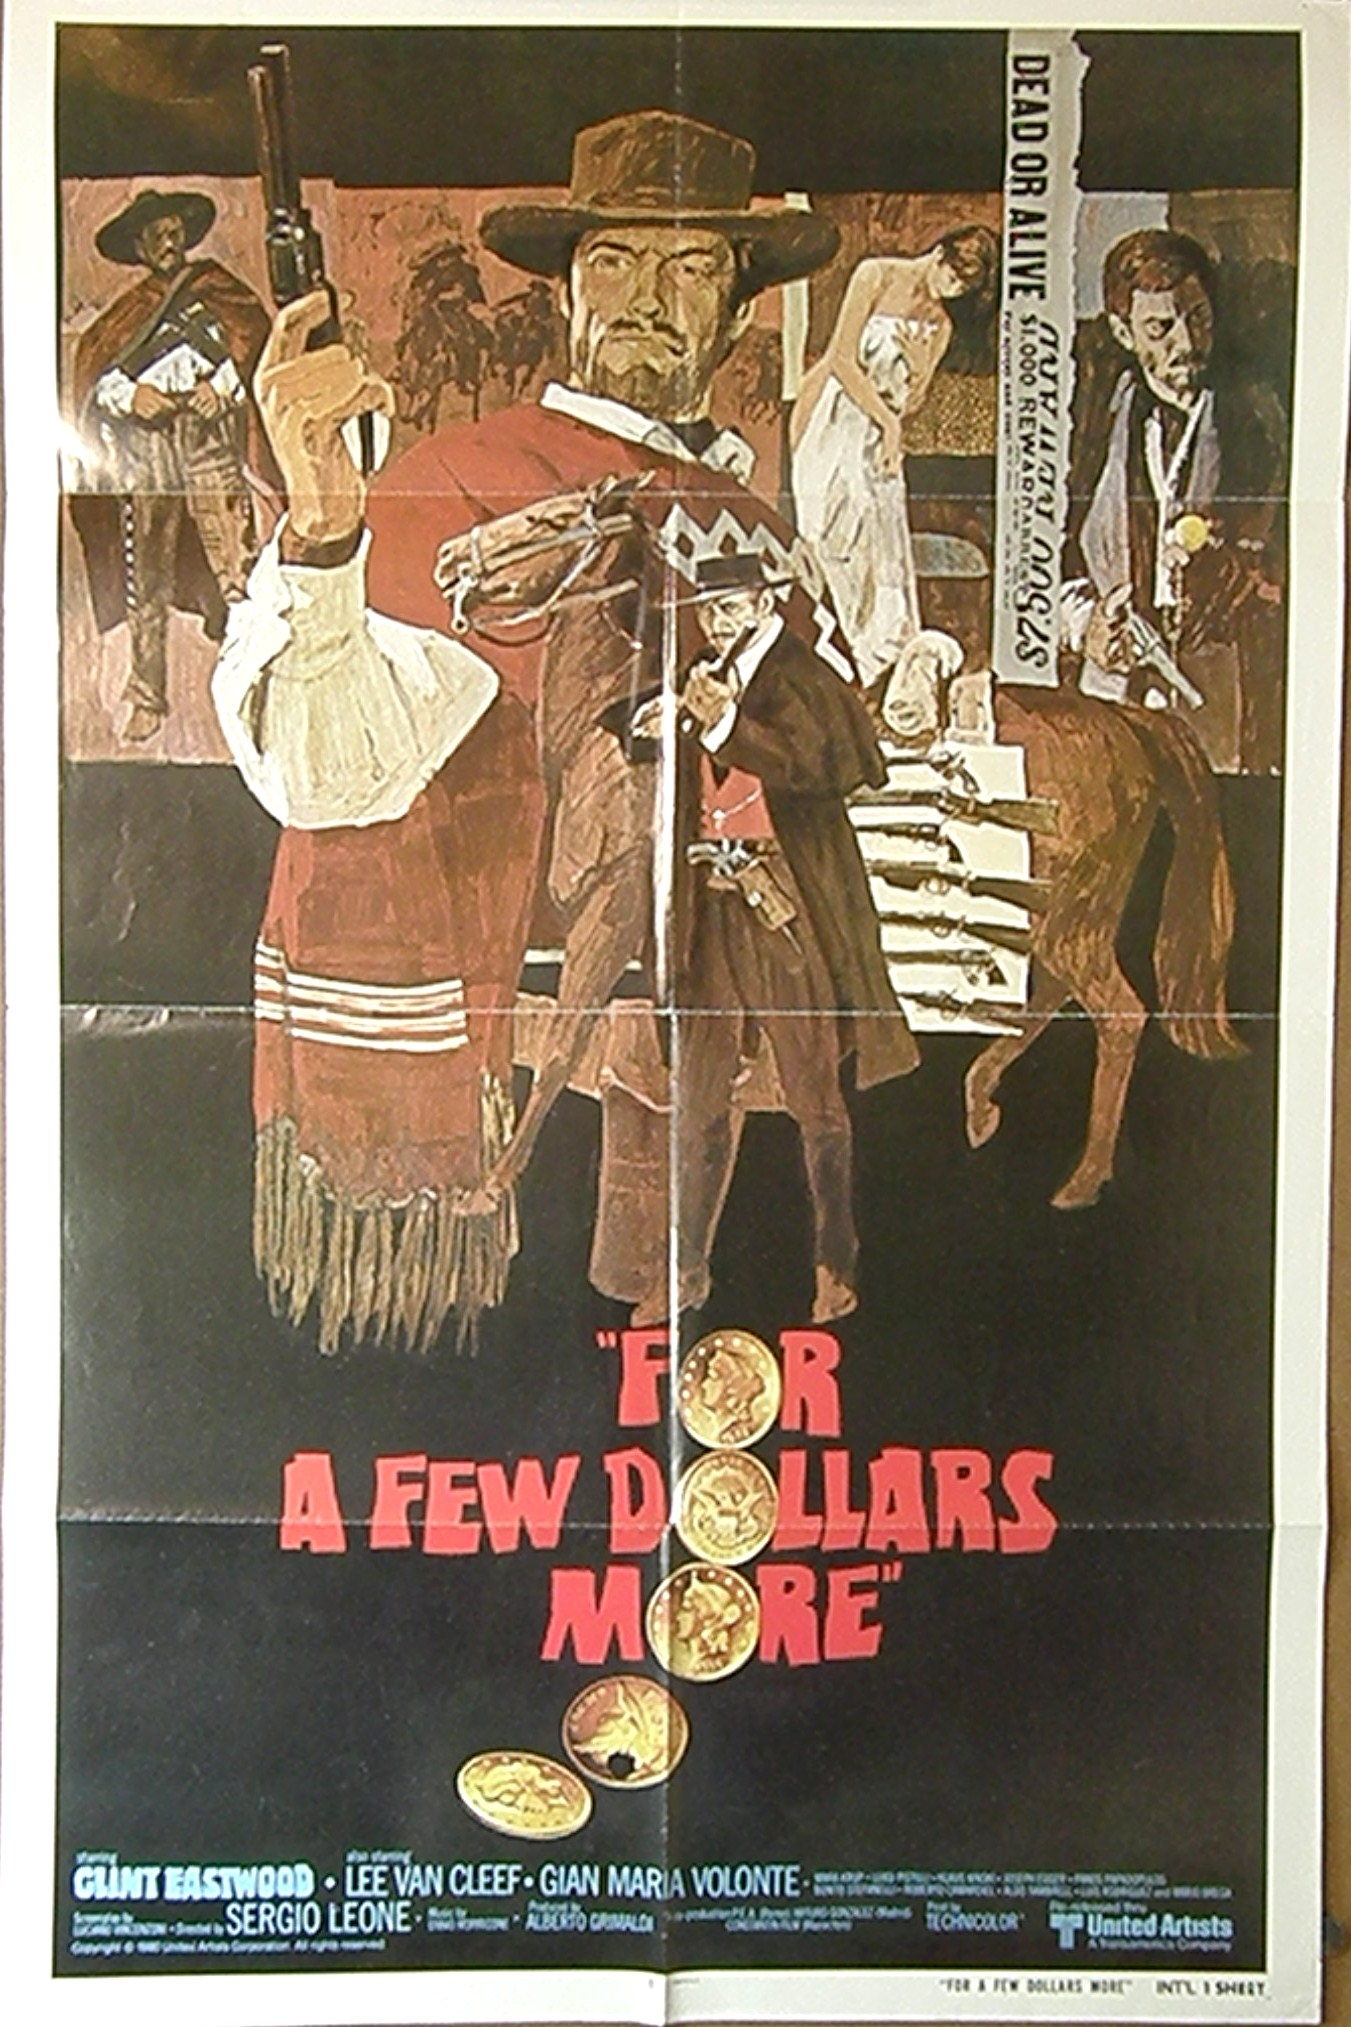 FOR A FEW DOLLARS MORE